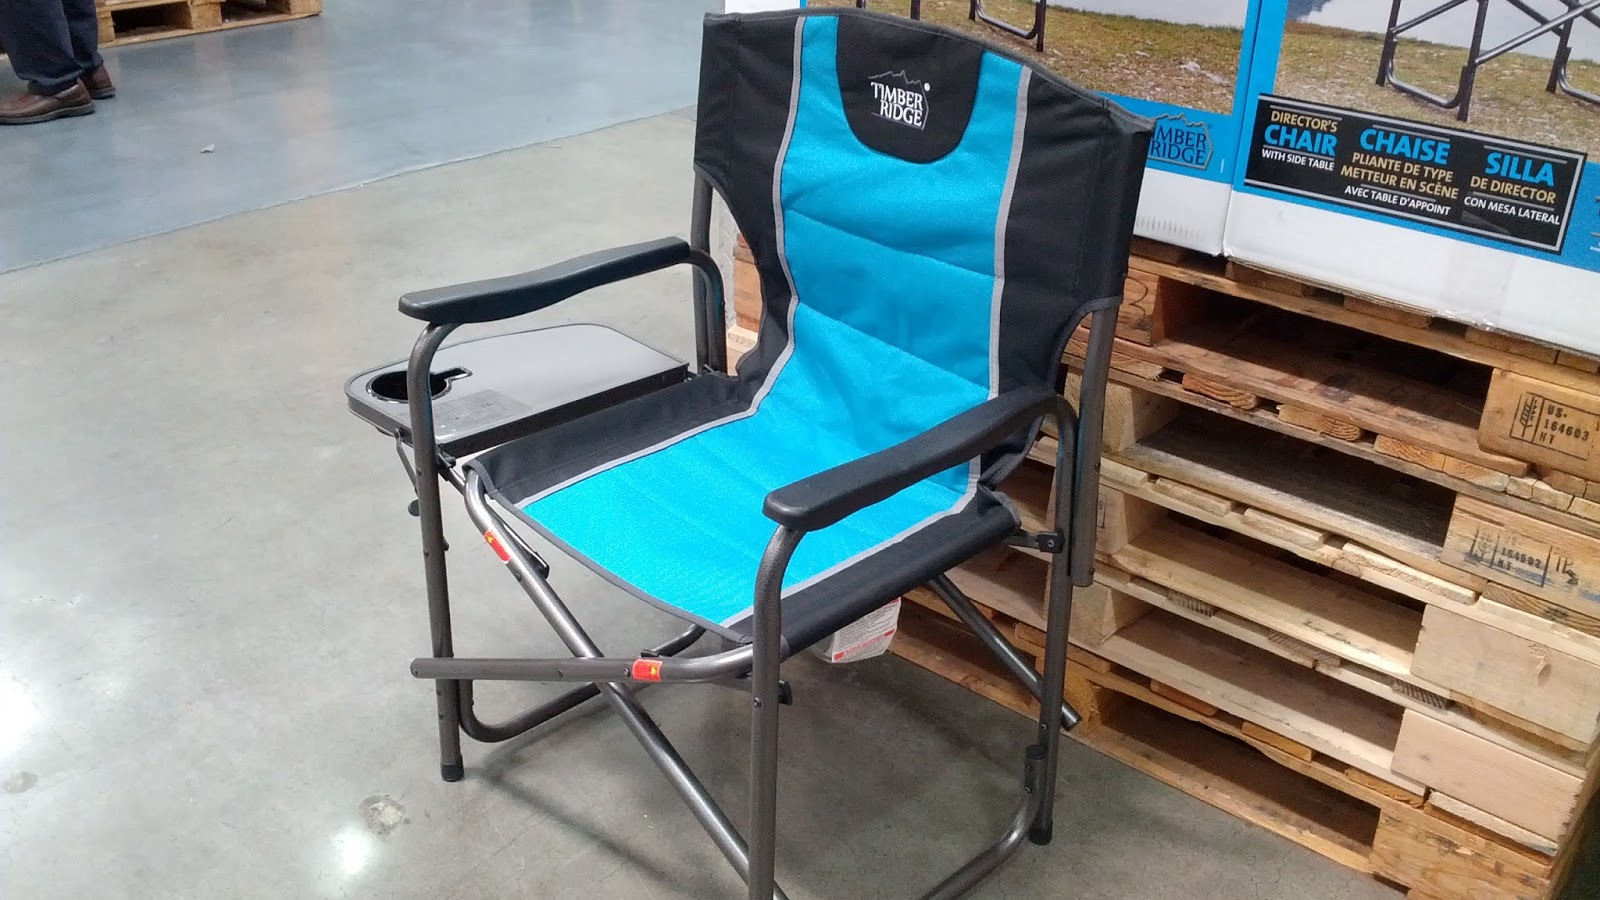 timber ridge director's chair with side table  costco weekender